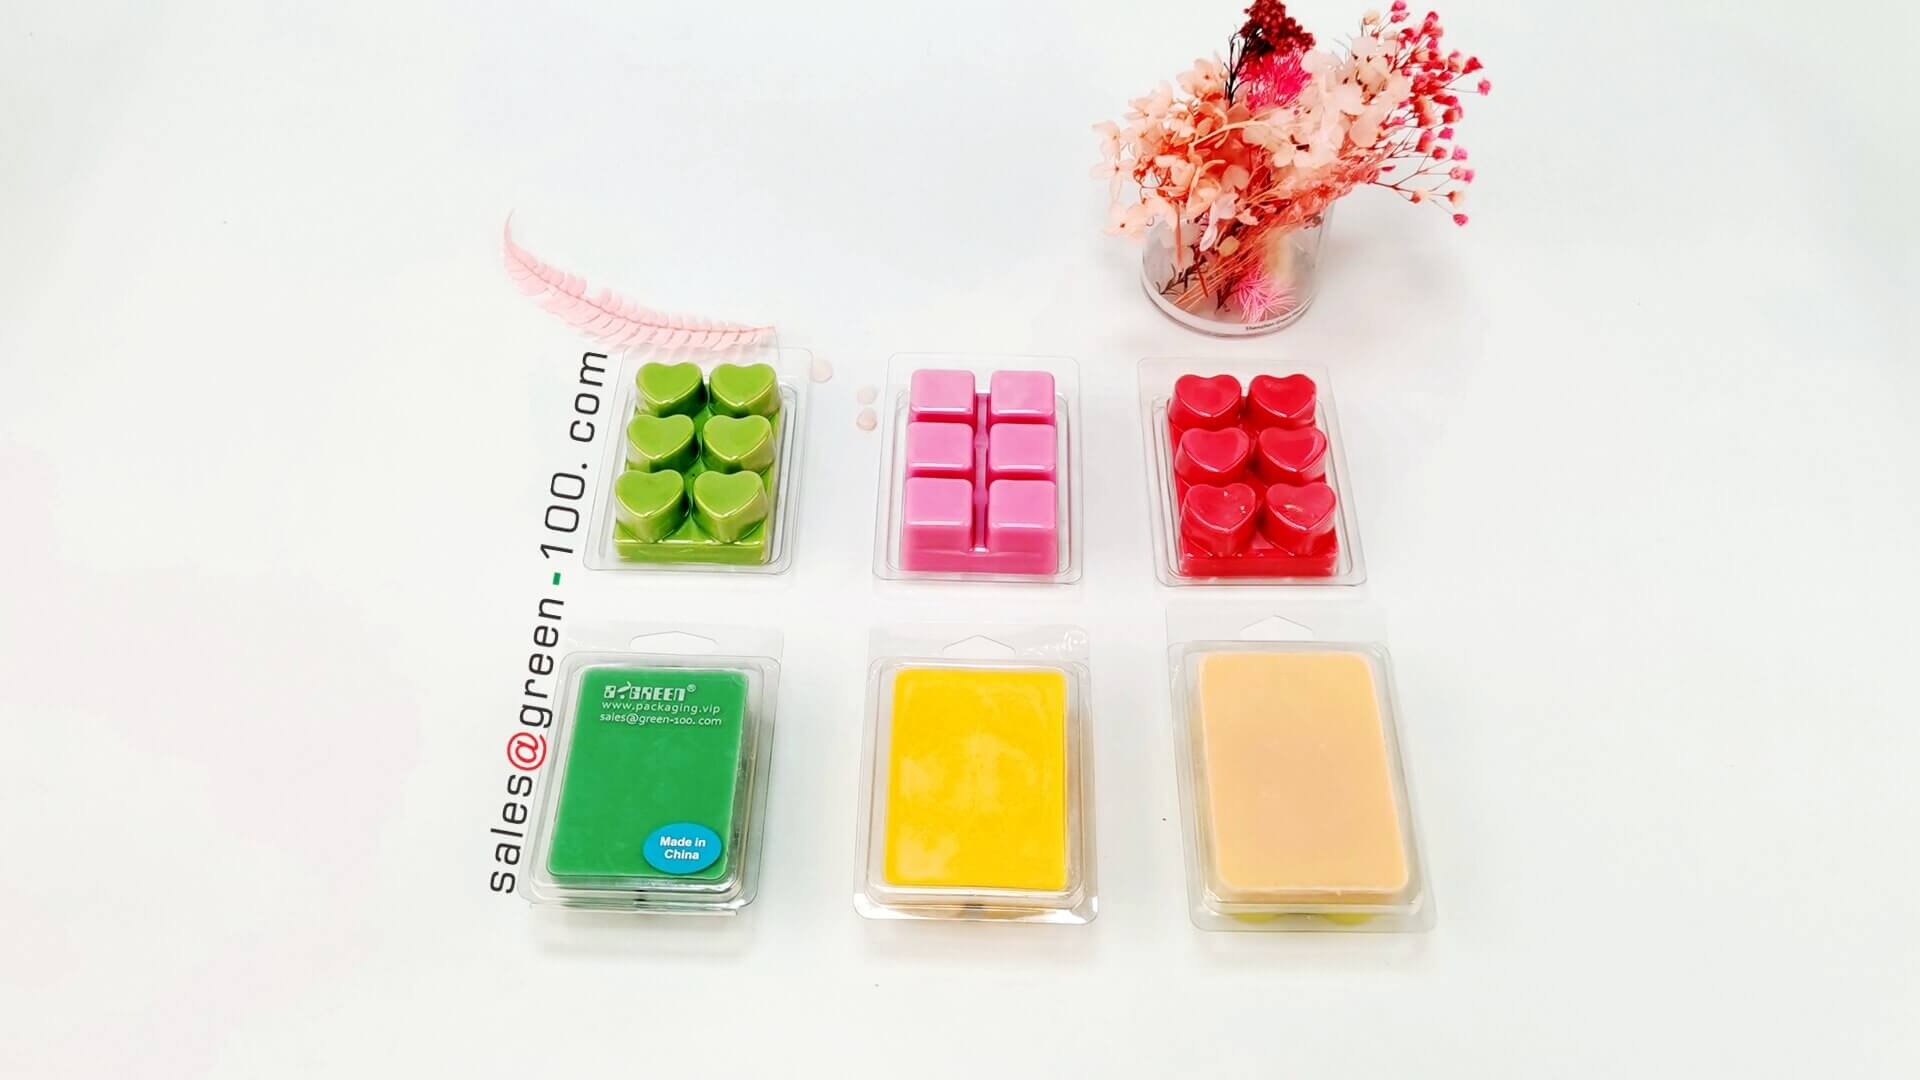 Custom Wax Melt Mold Customized Wax Melt Moulds with Personalized